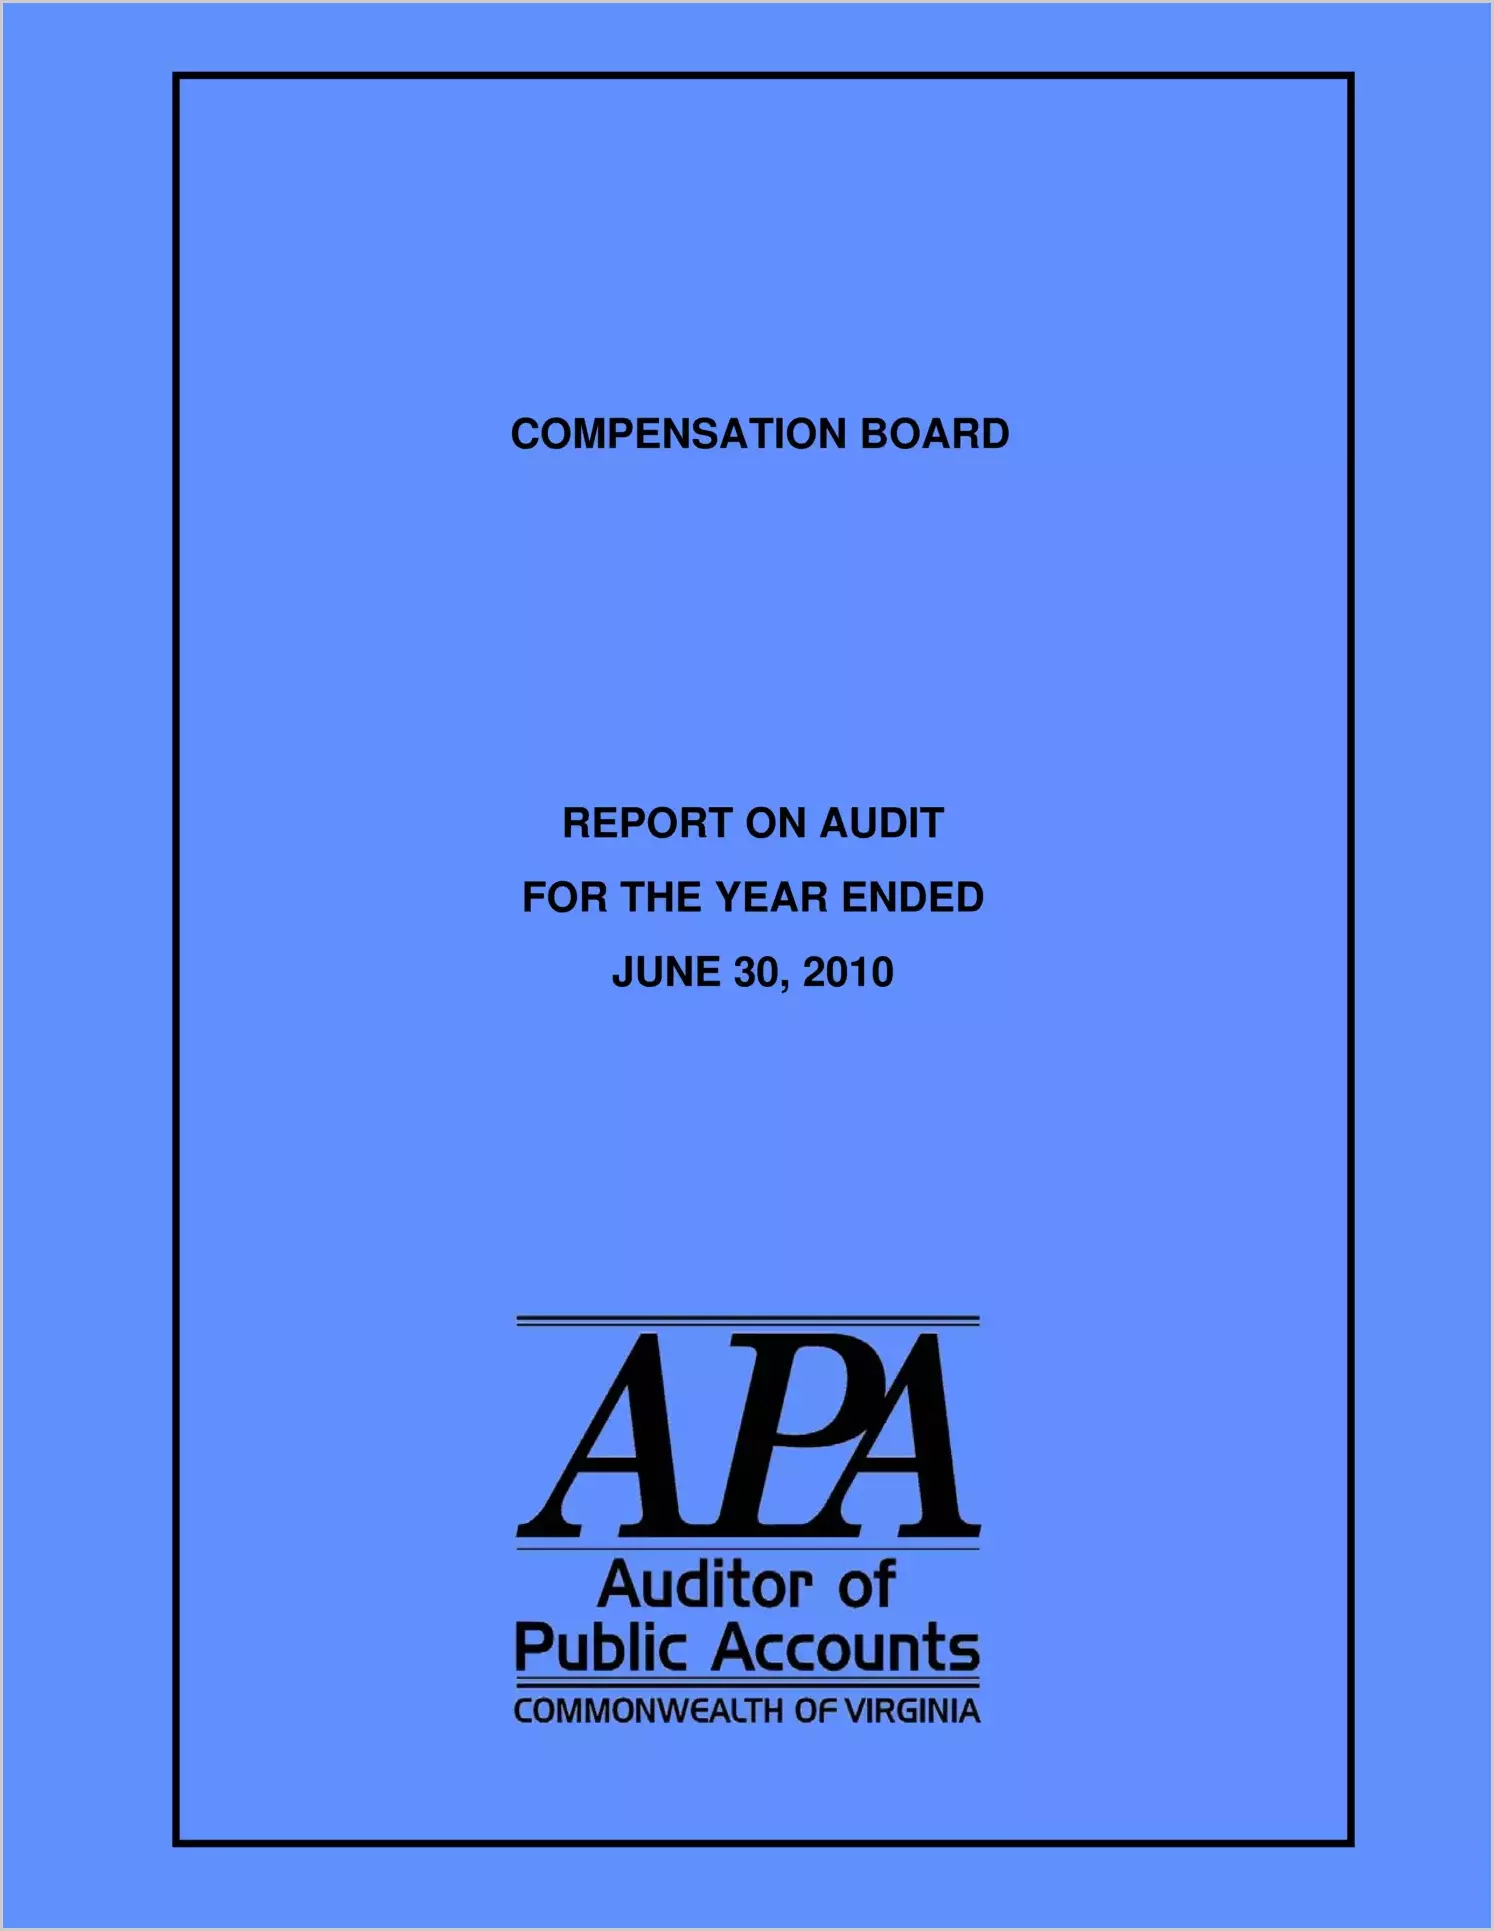 Compensation Board Report on Audit for the fiscal year ended June 30, 2010